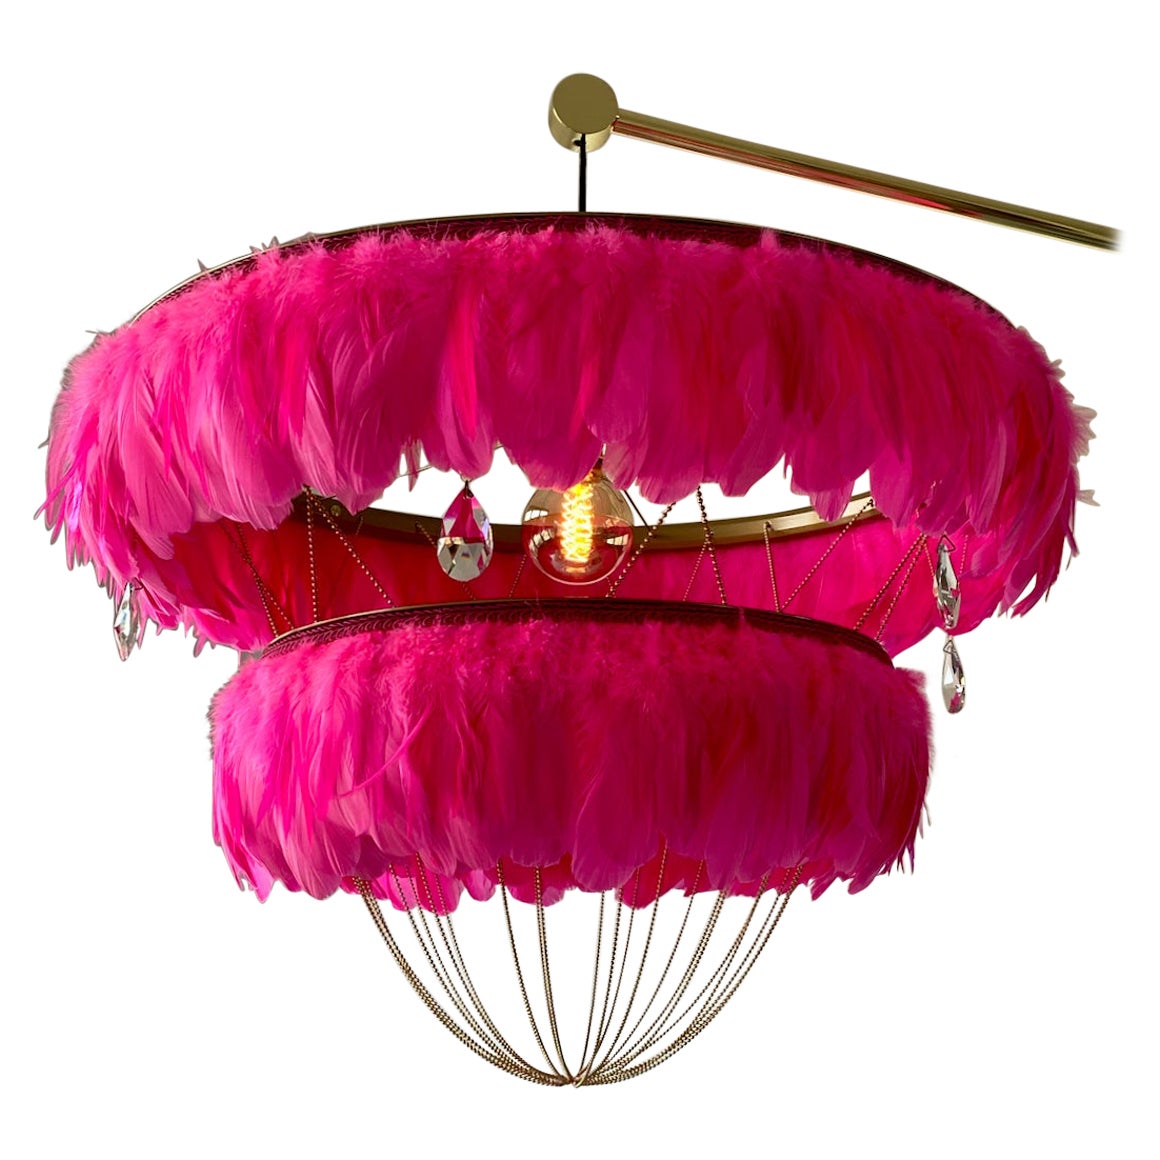 Feather Chandelier in Shocking Pink - Bertie -  Hand Made to order in London.  For Sale